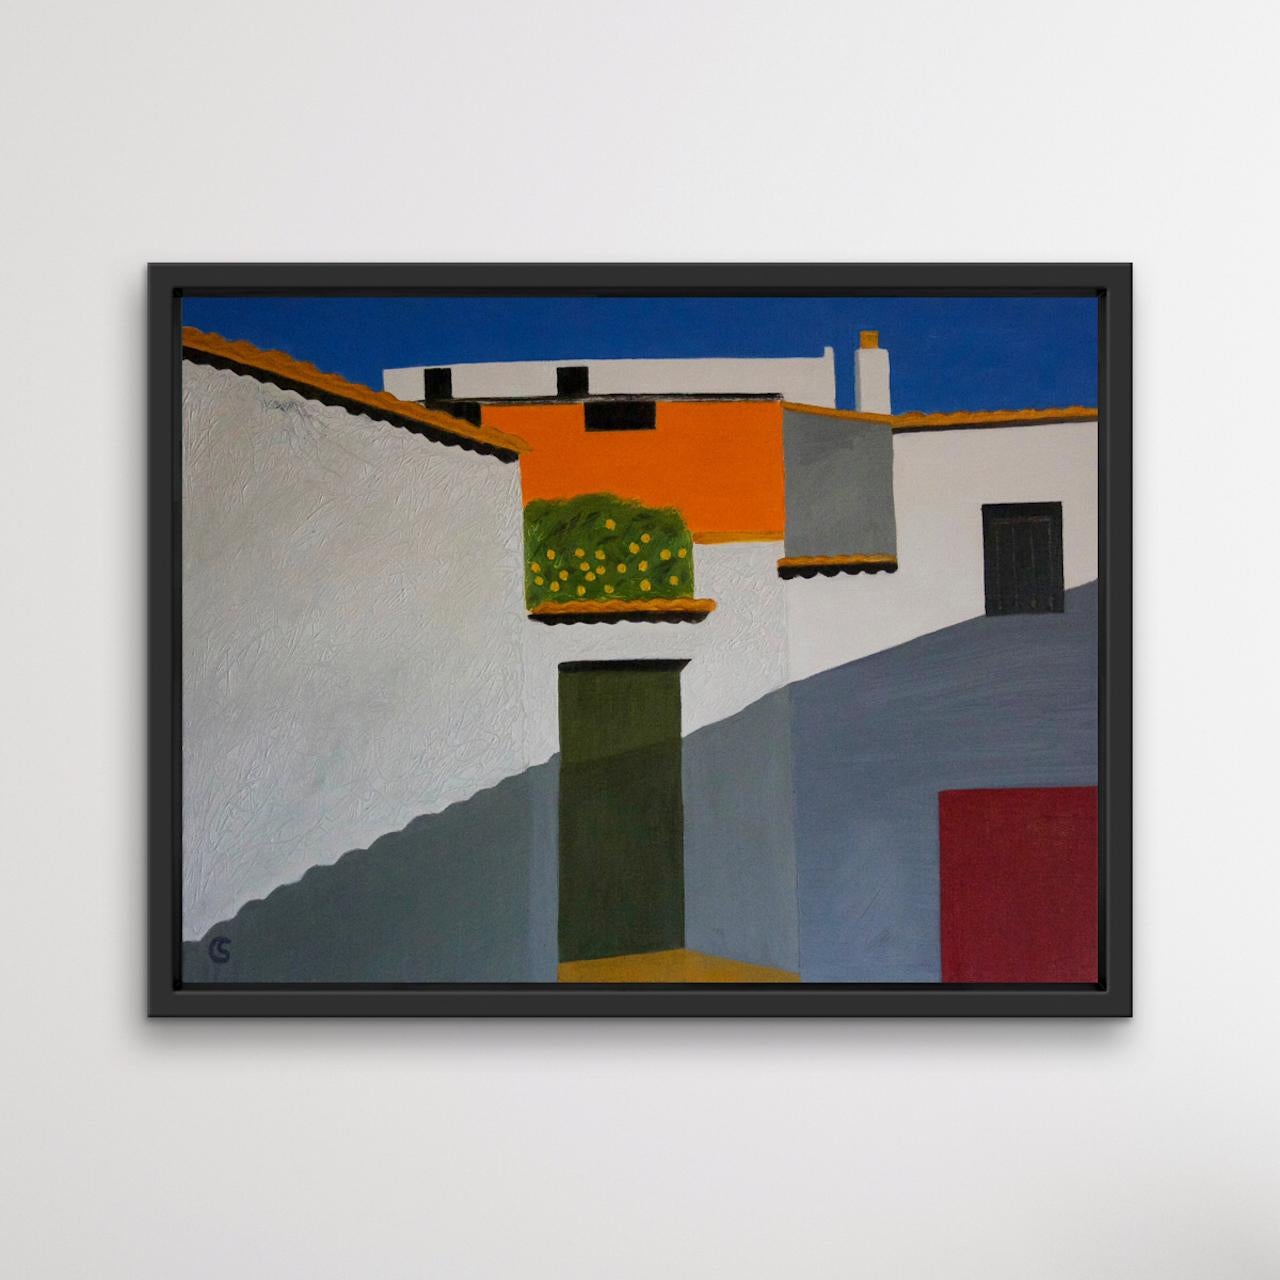 Christo Sharpe has always been fascinated by the abstract shapes that divide town buildings, especially near where he lives in Andalusia. This is an example where the colours, textures and shapes stand out to make the type of image Christo Sharpe